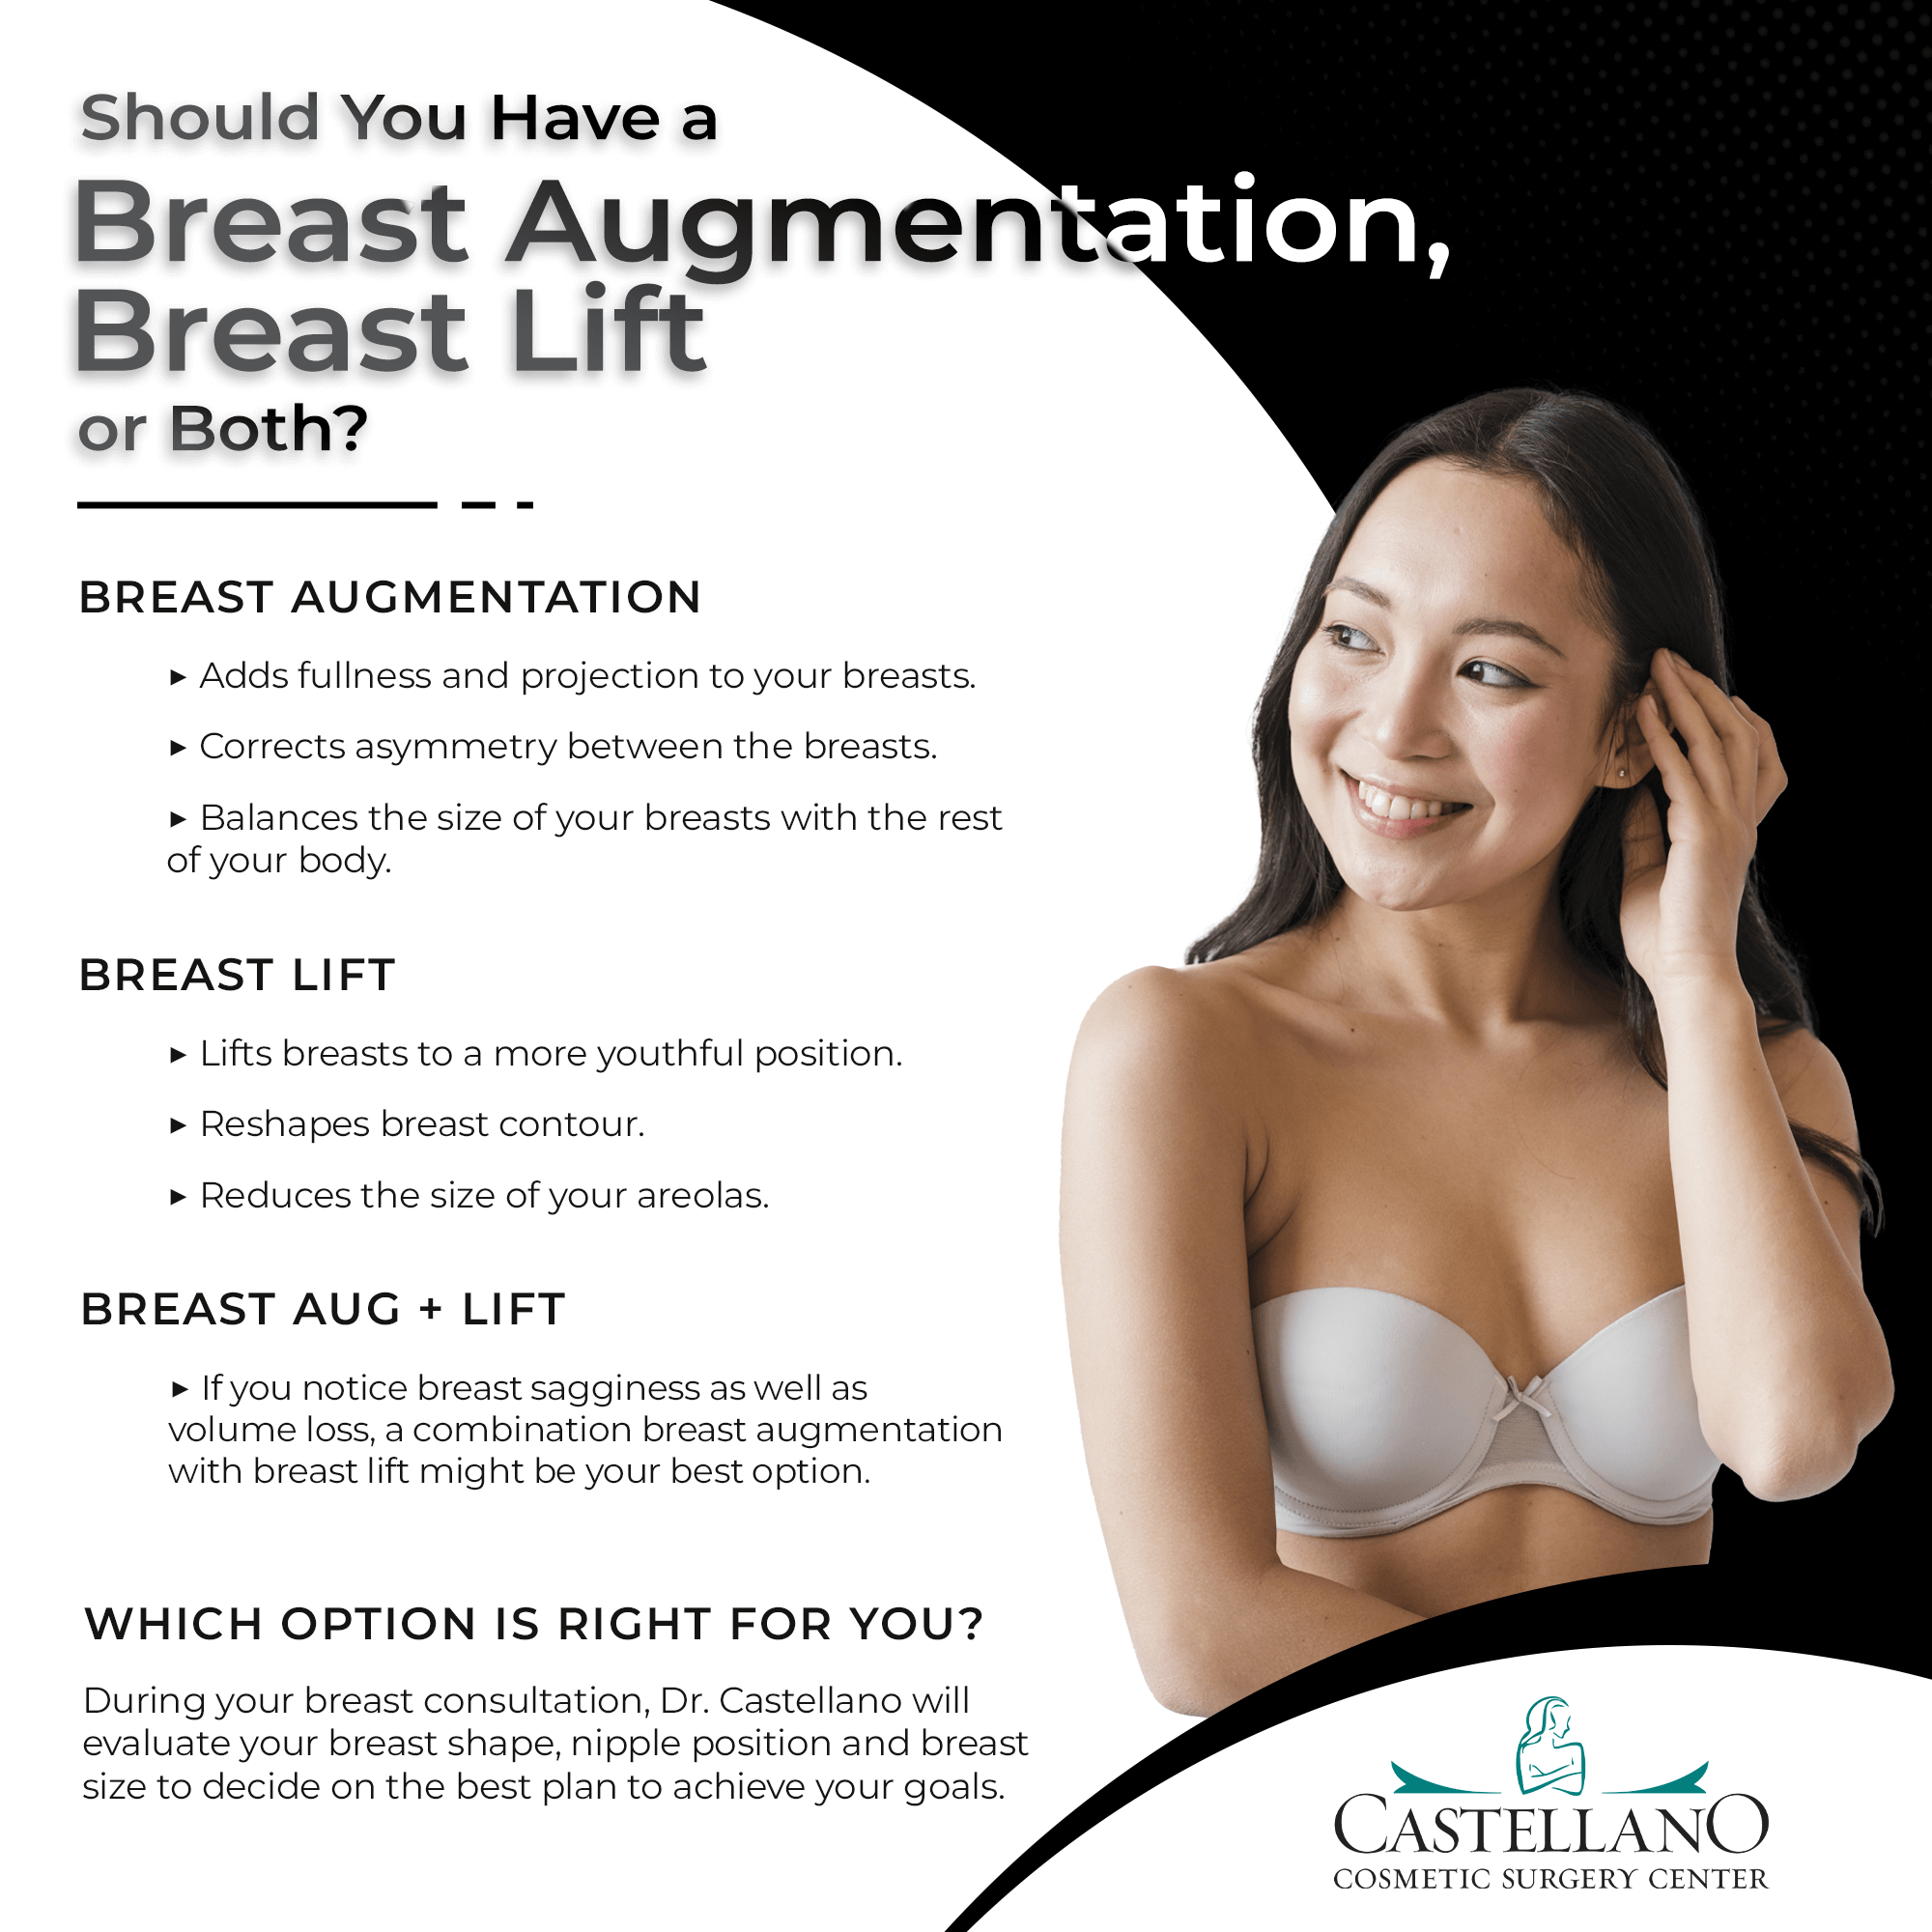 Should You Have a Breast Augmentation, Breast Lift or Both?